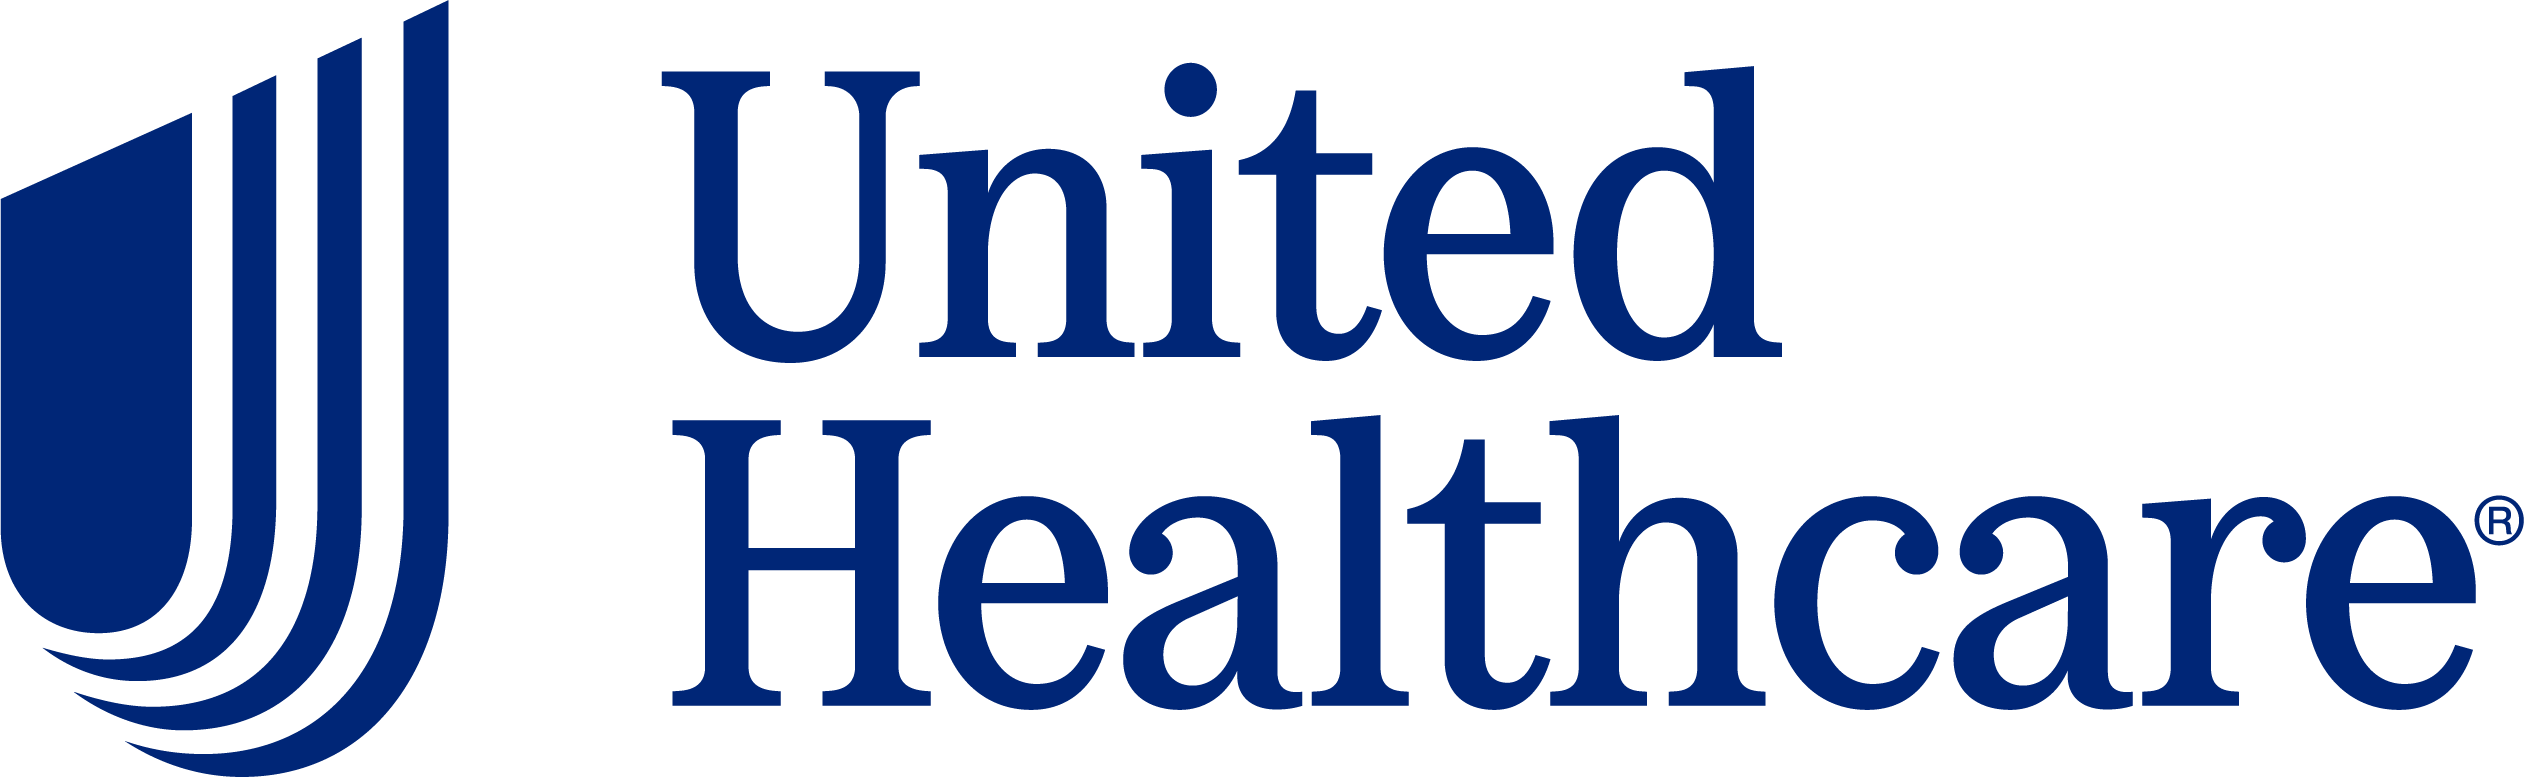 A. United Healthcare (Presenting and Promise Garden) 